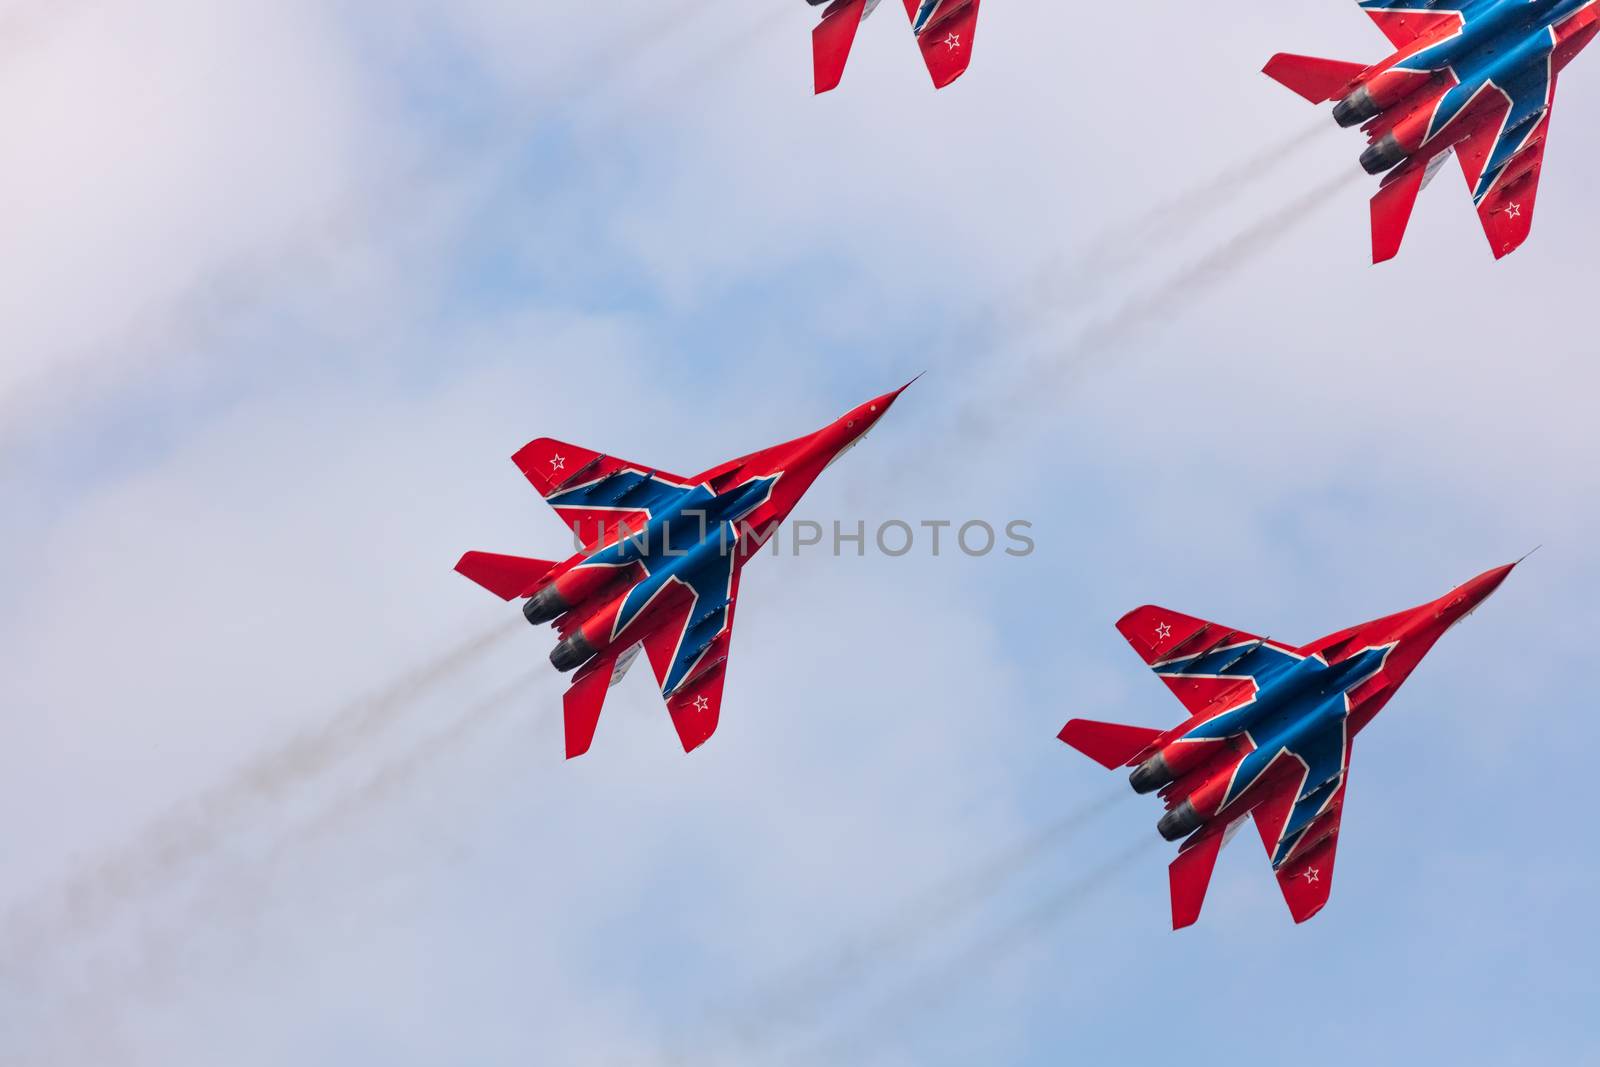 Barnaul, Russia - September 19, 2020: A low angle close-up shot of Strizhi MiG-29 fighter jet squadron performing stunts during an aeroshow. Blue cloudy sky as a background.